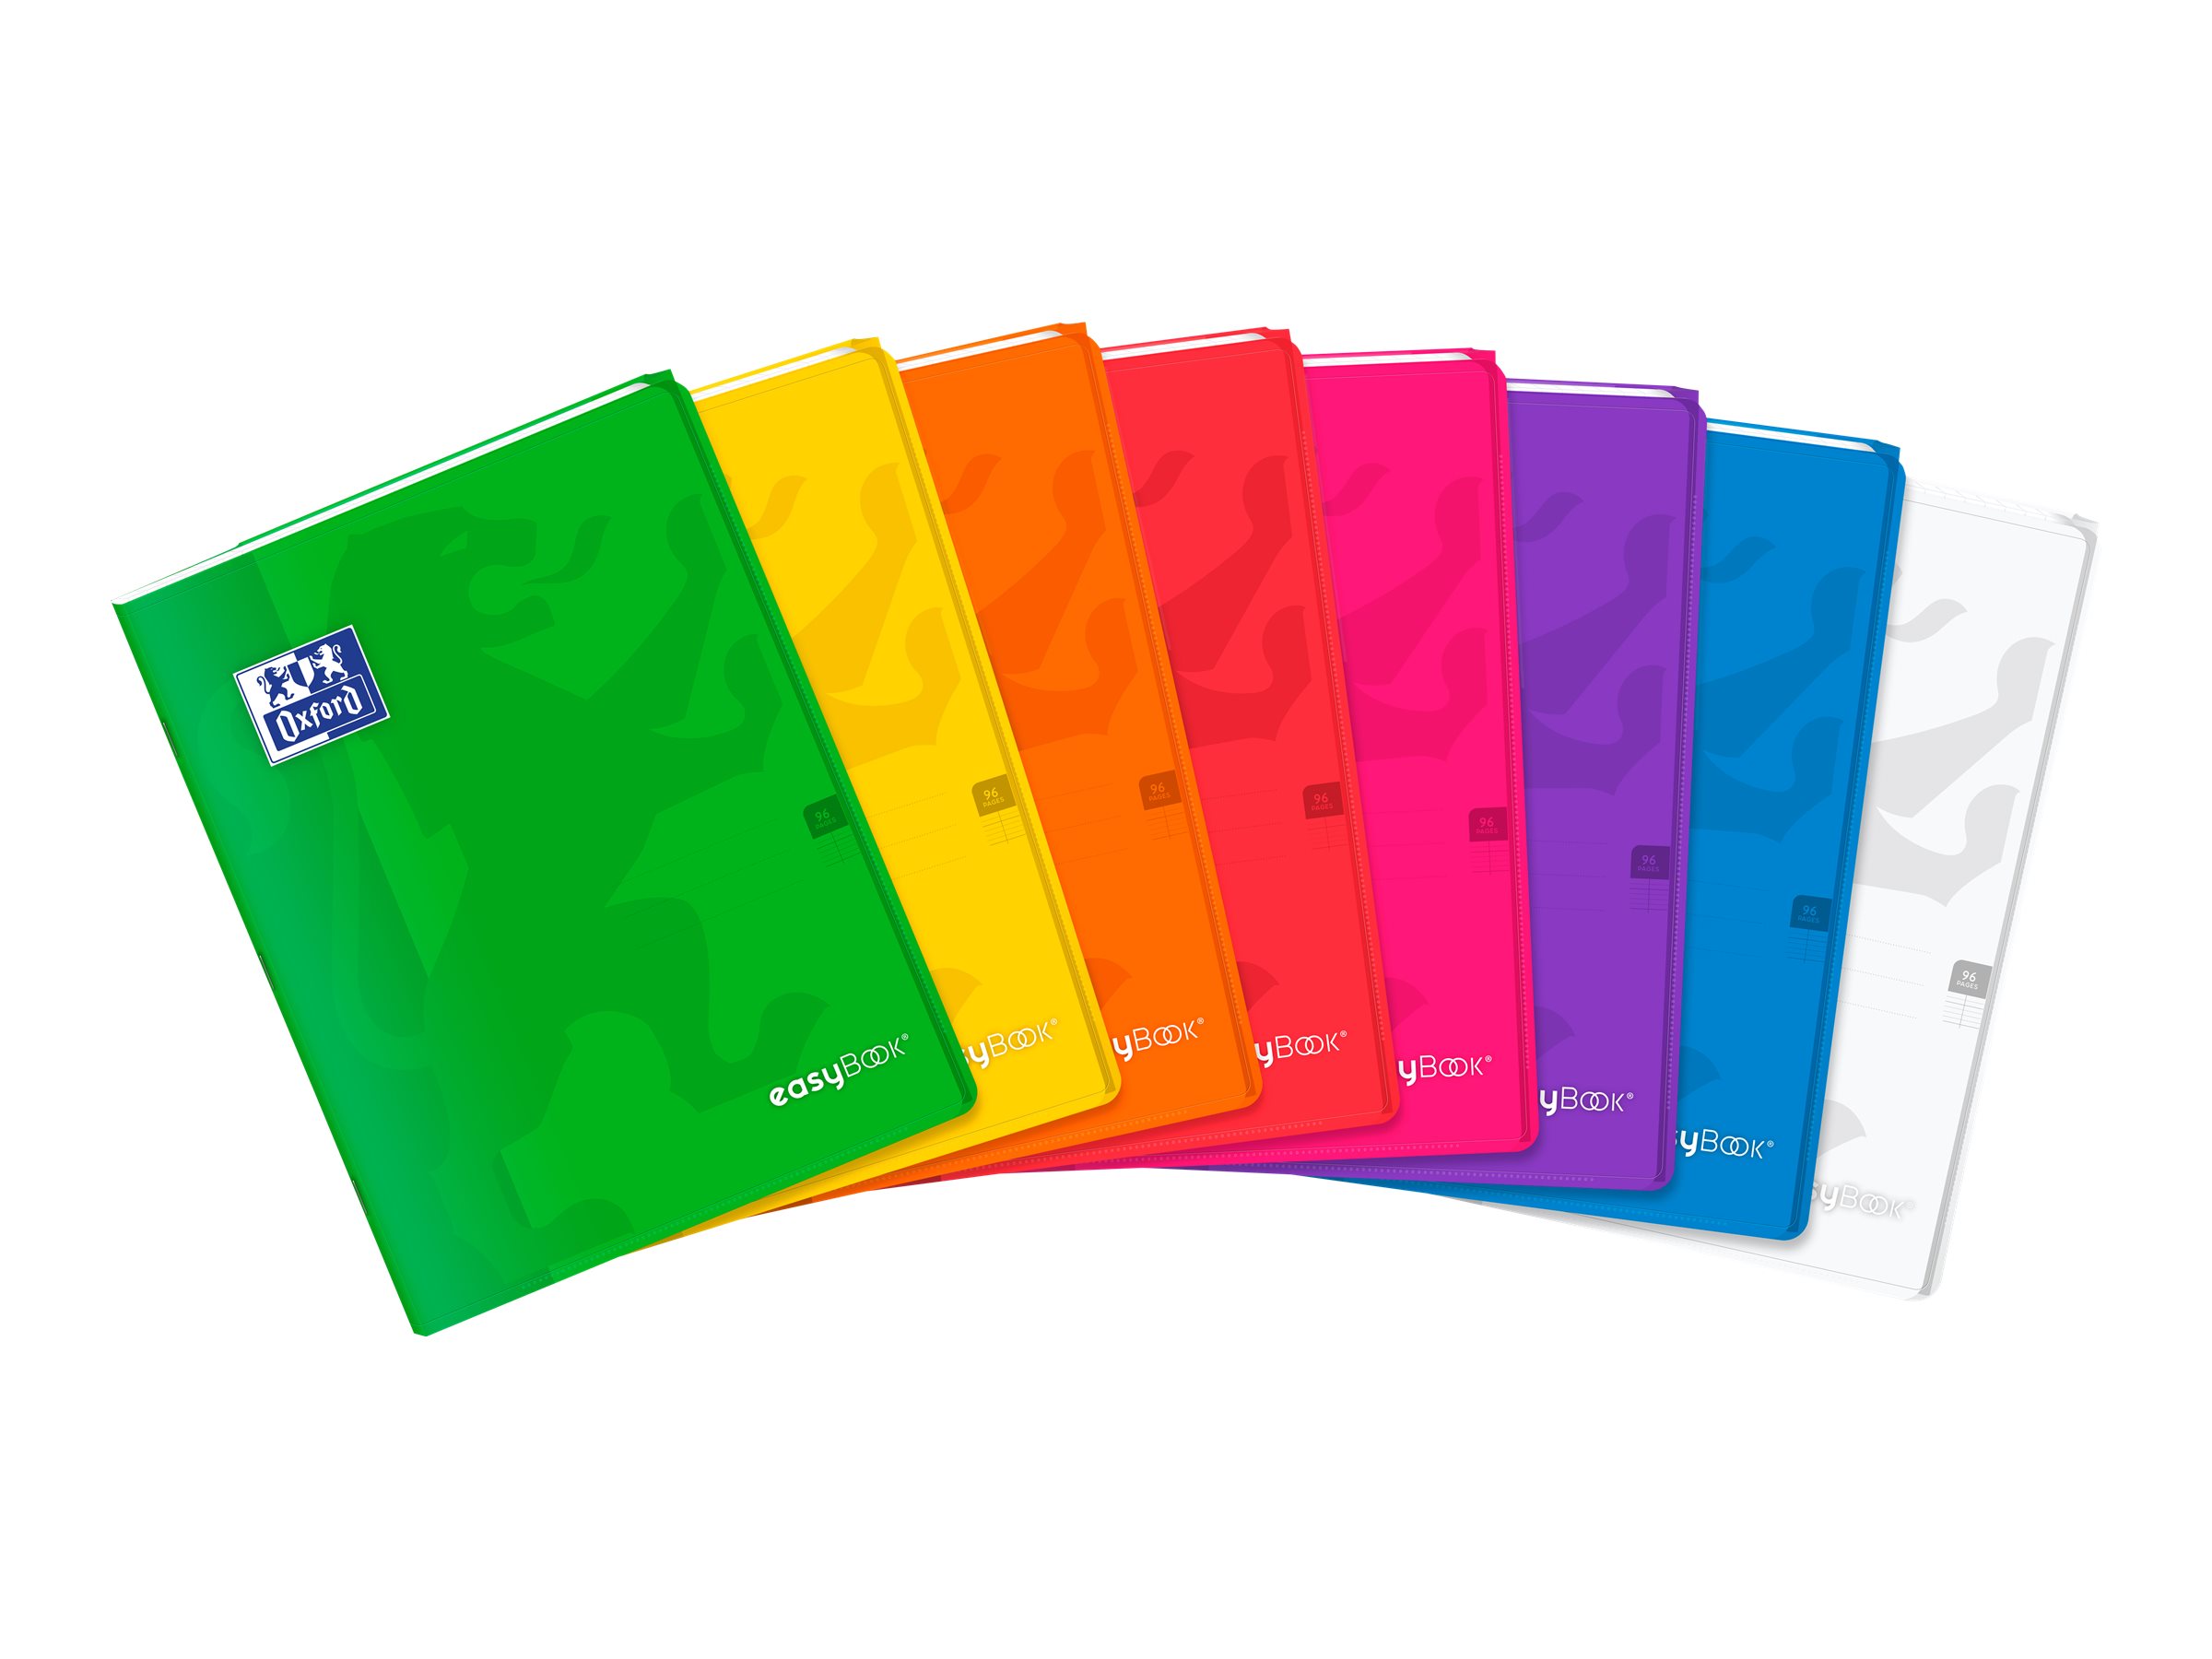 Cahier polypro